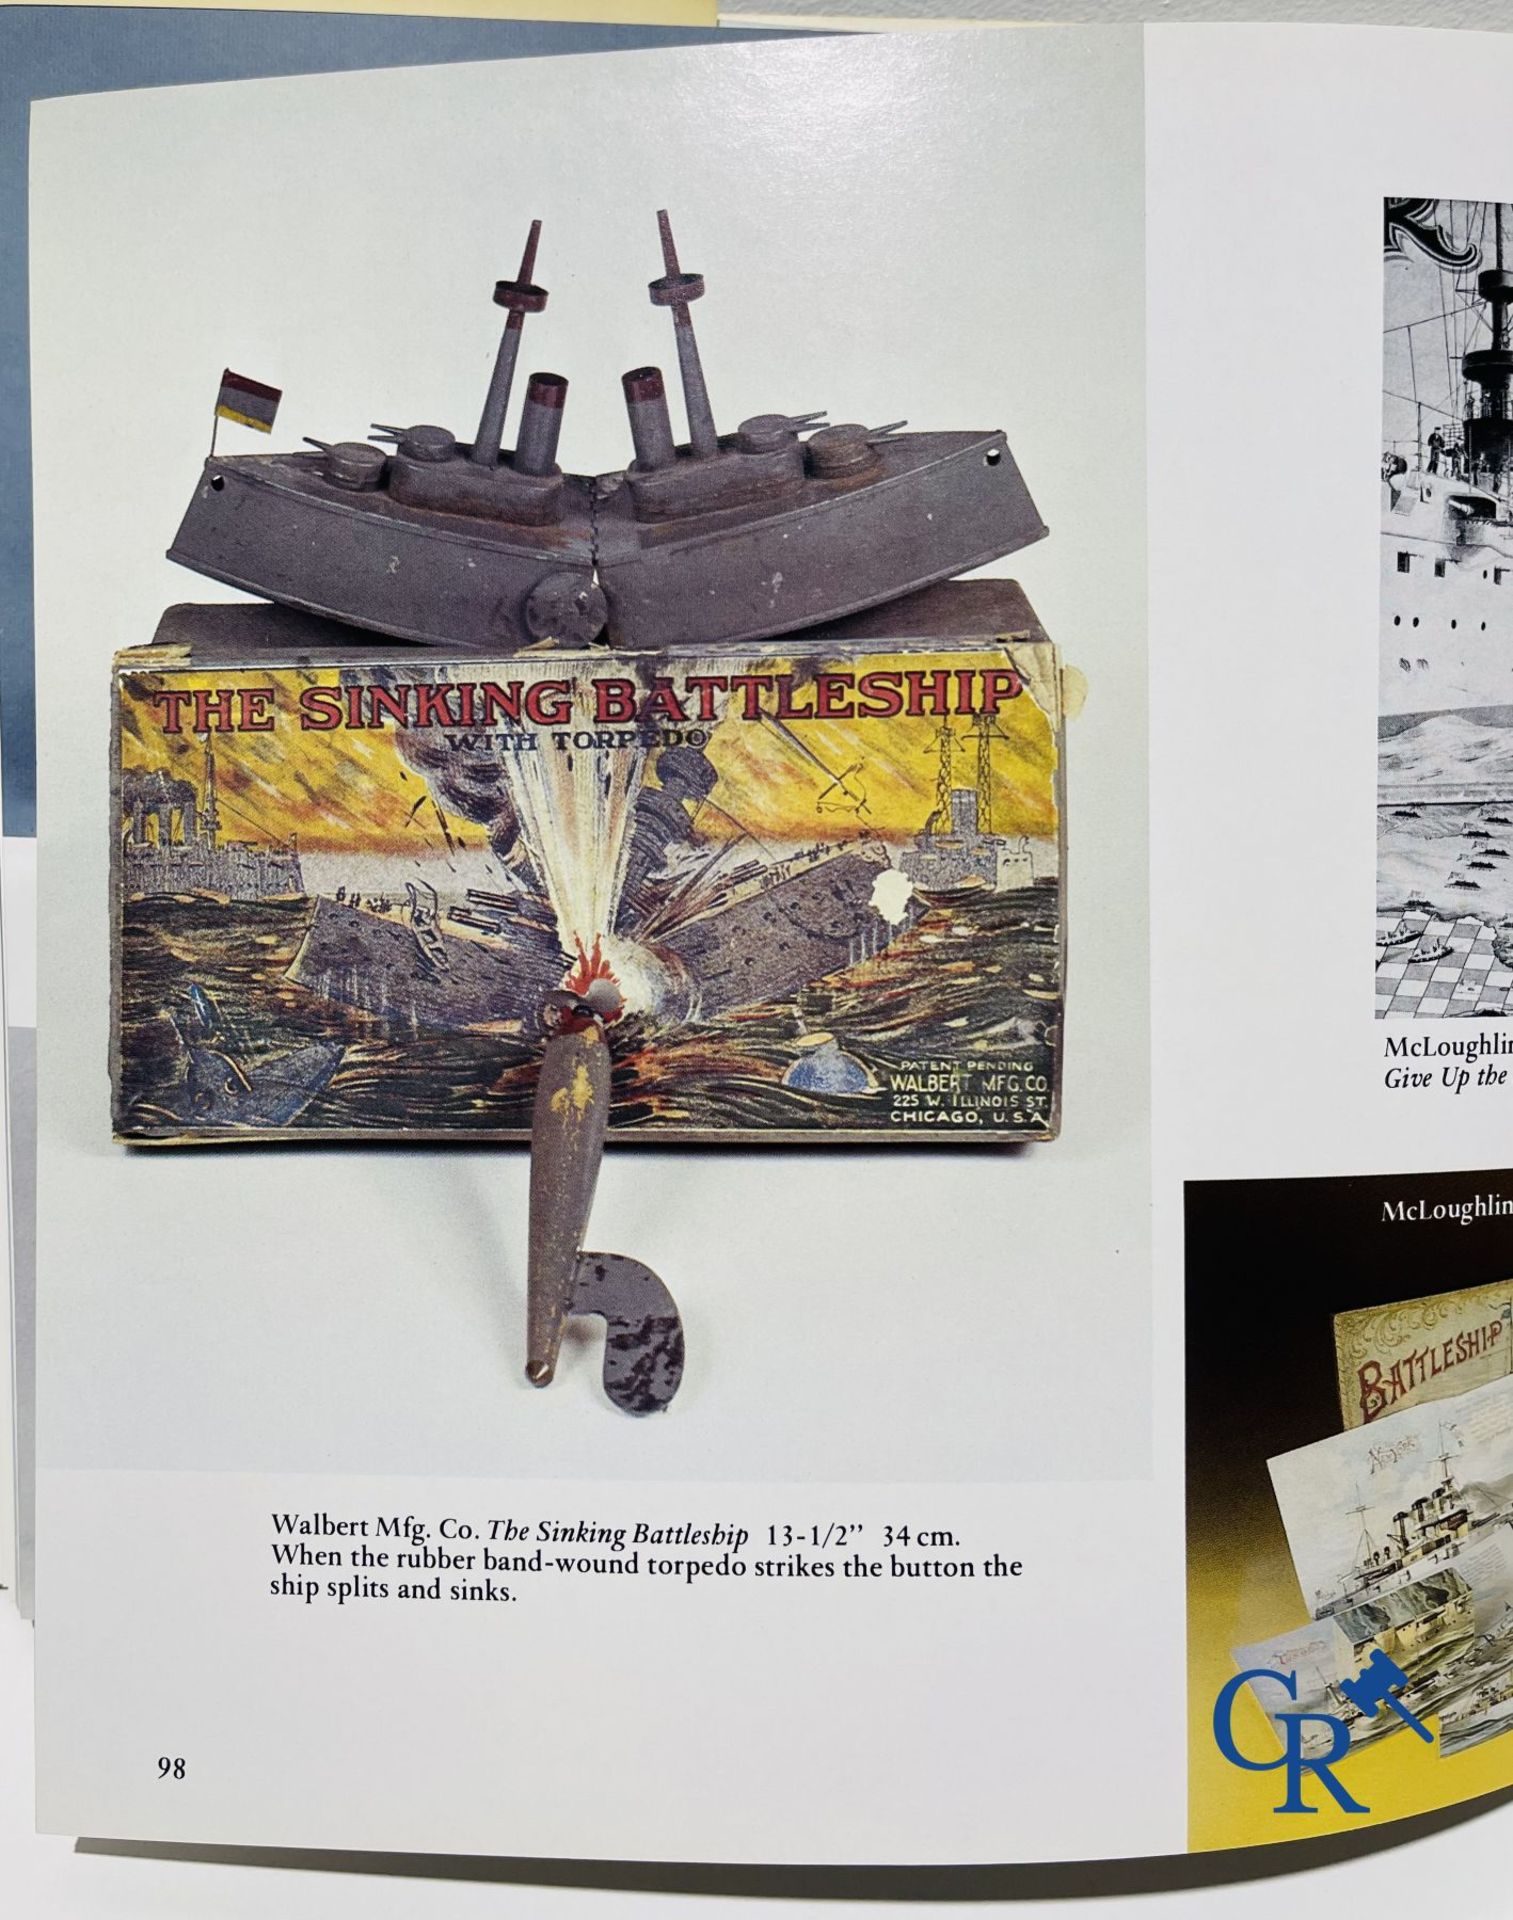 Old toys: Jacques Milet. 4 books on toy boats and 2 original drawings by Jacques Milet. - Image 8 of 13